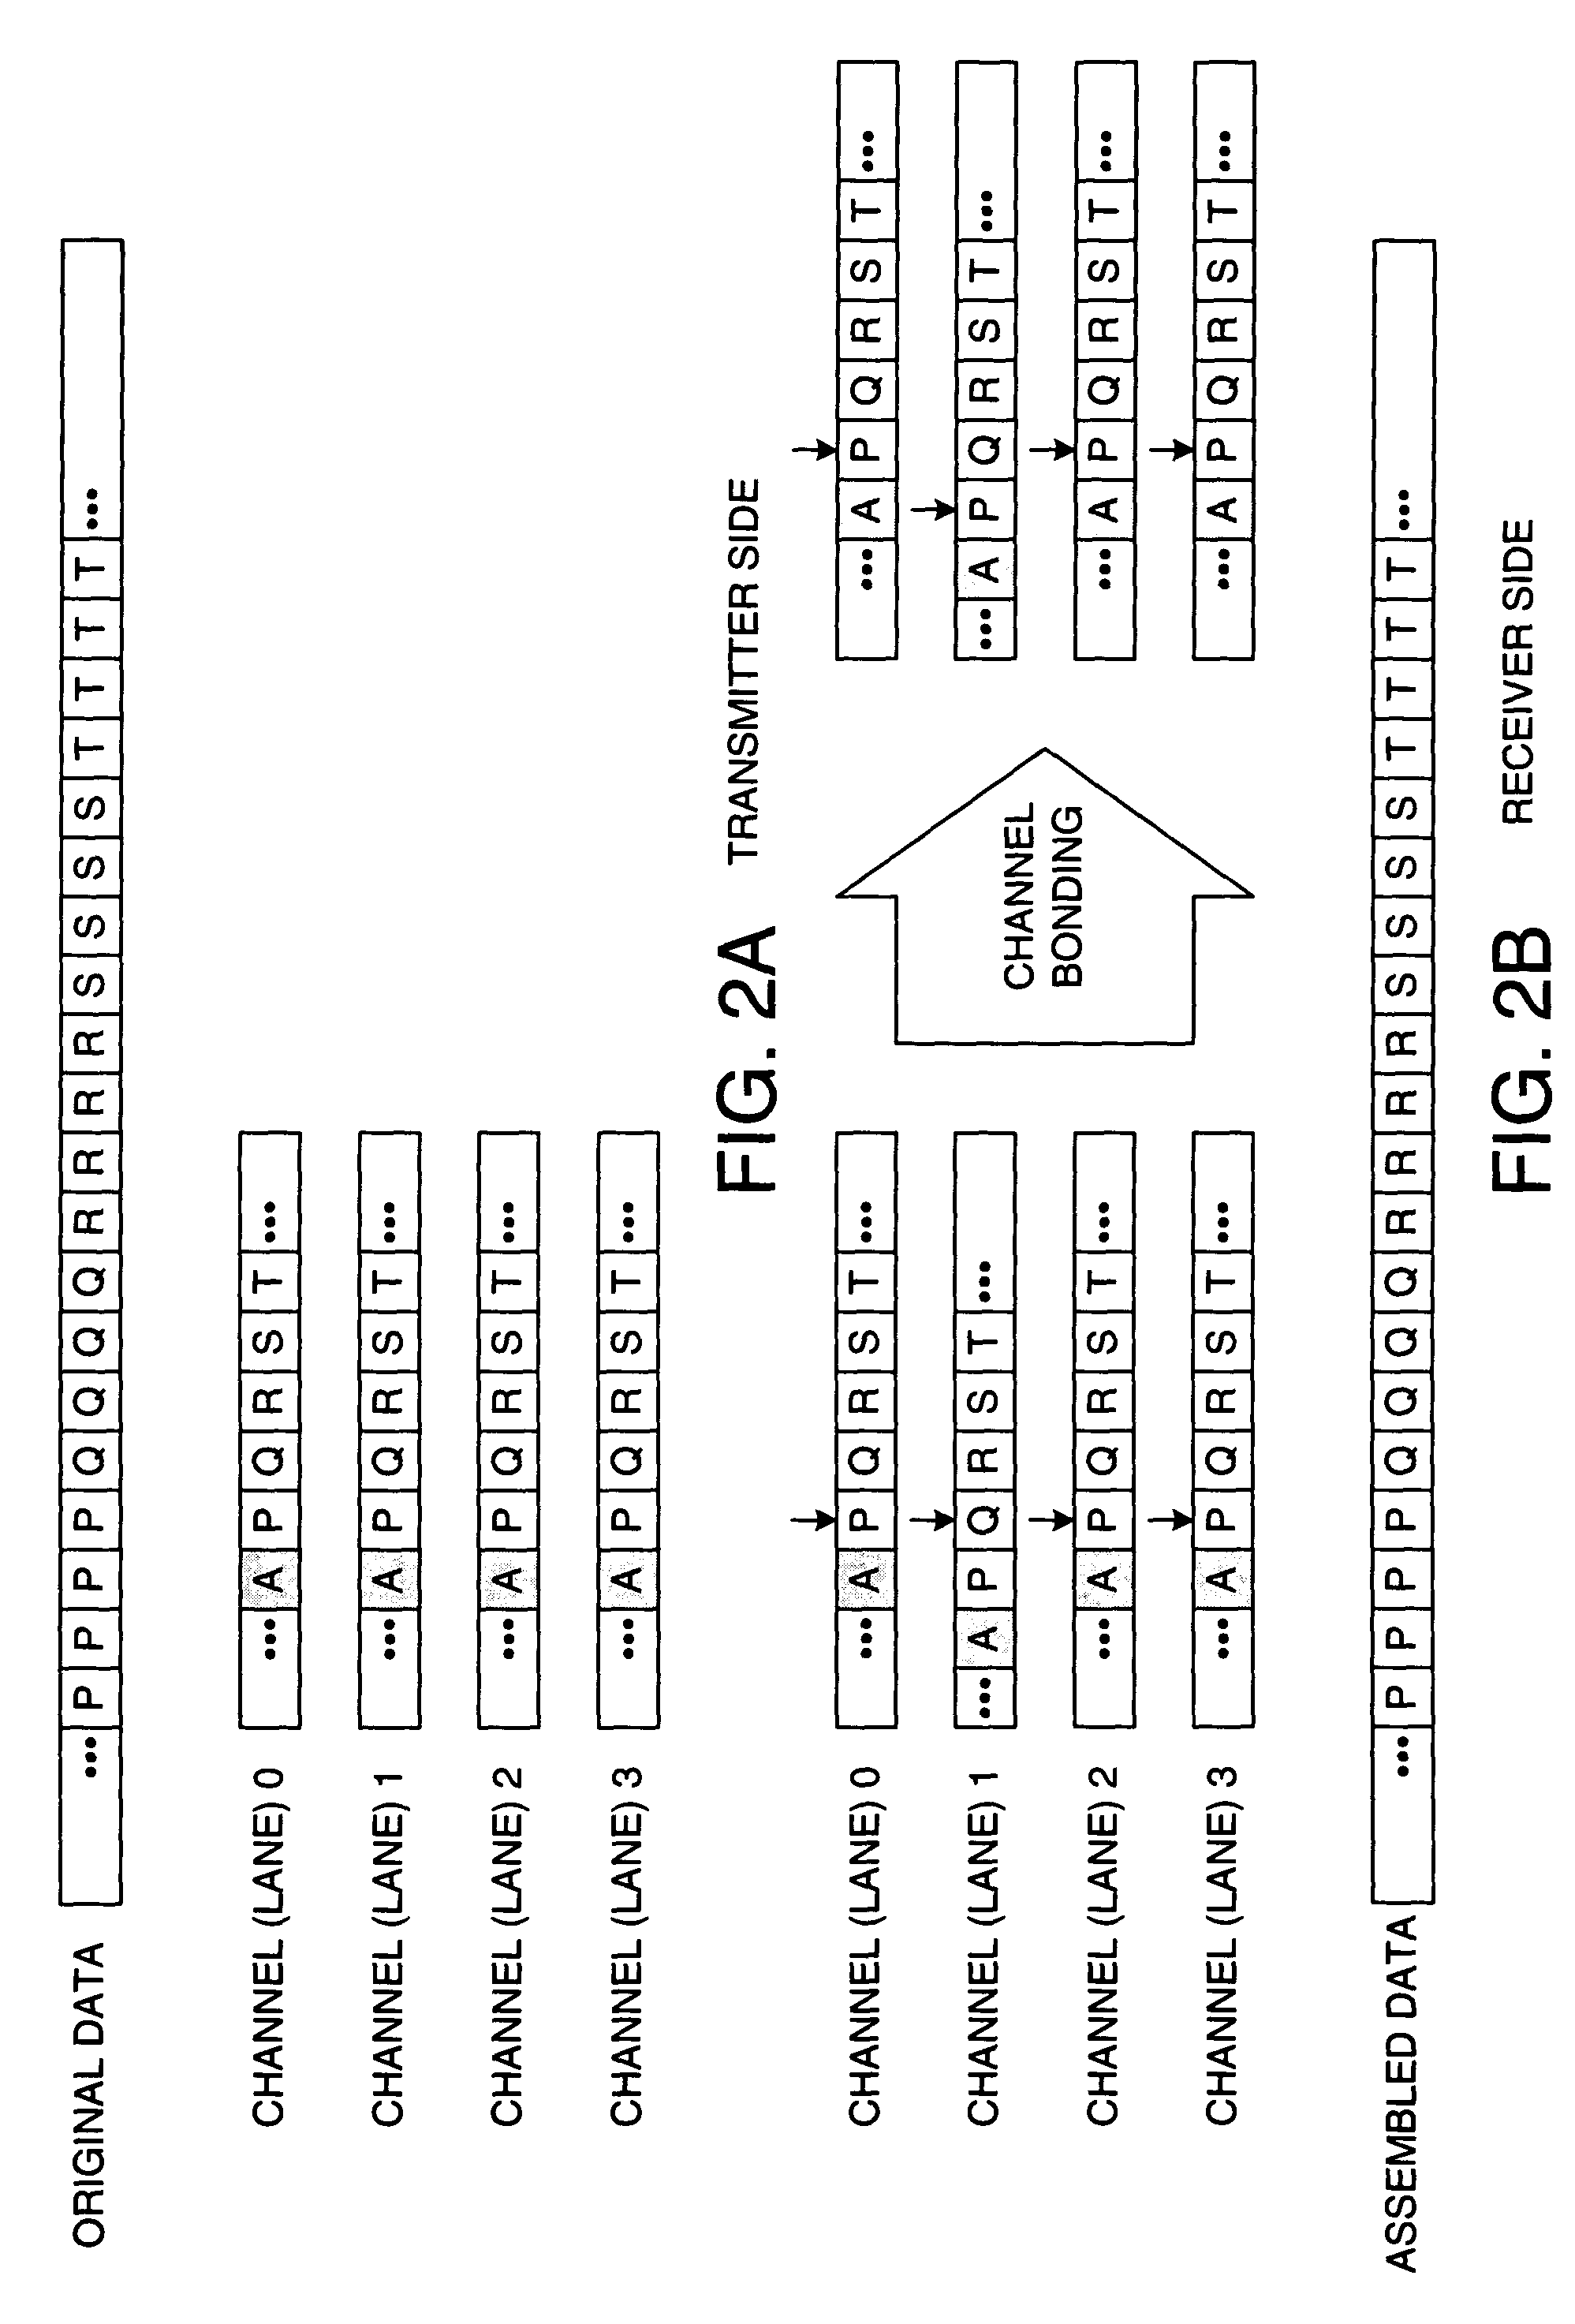 Distributed adaptive channel bonding control for improved tolerance of inter-channel skew